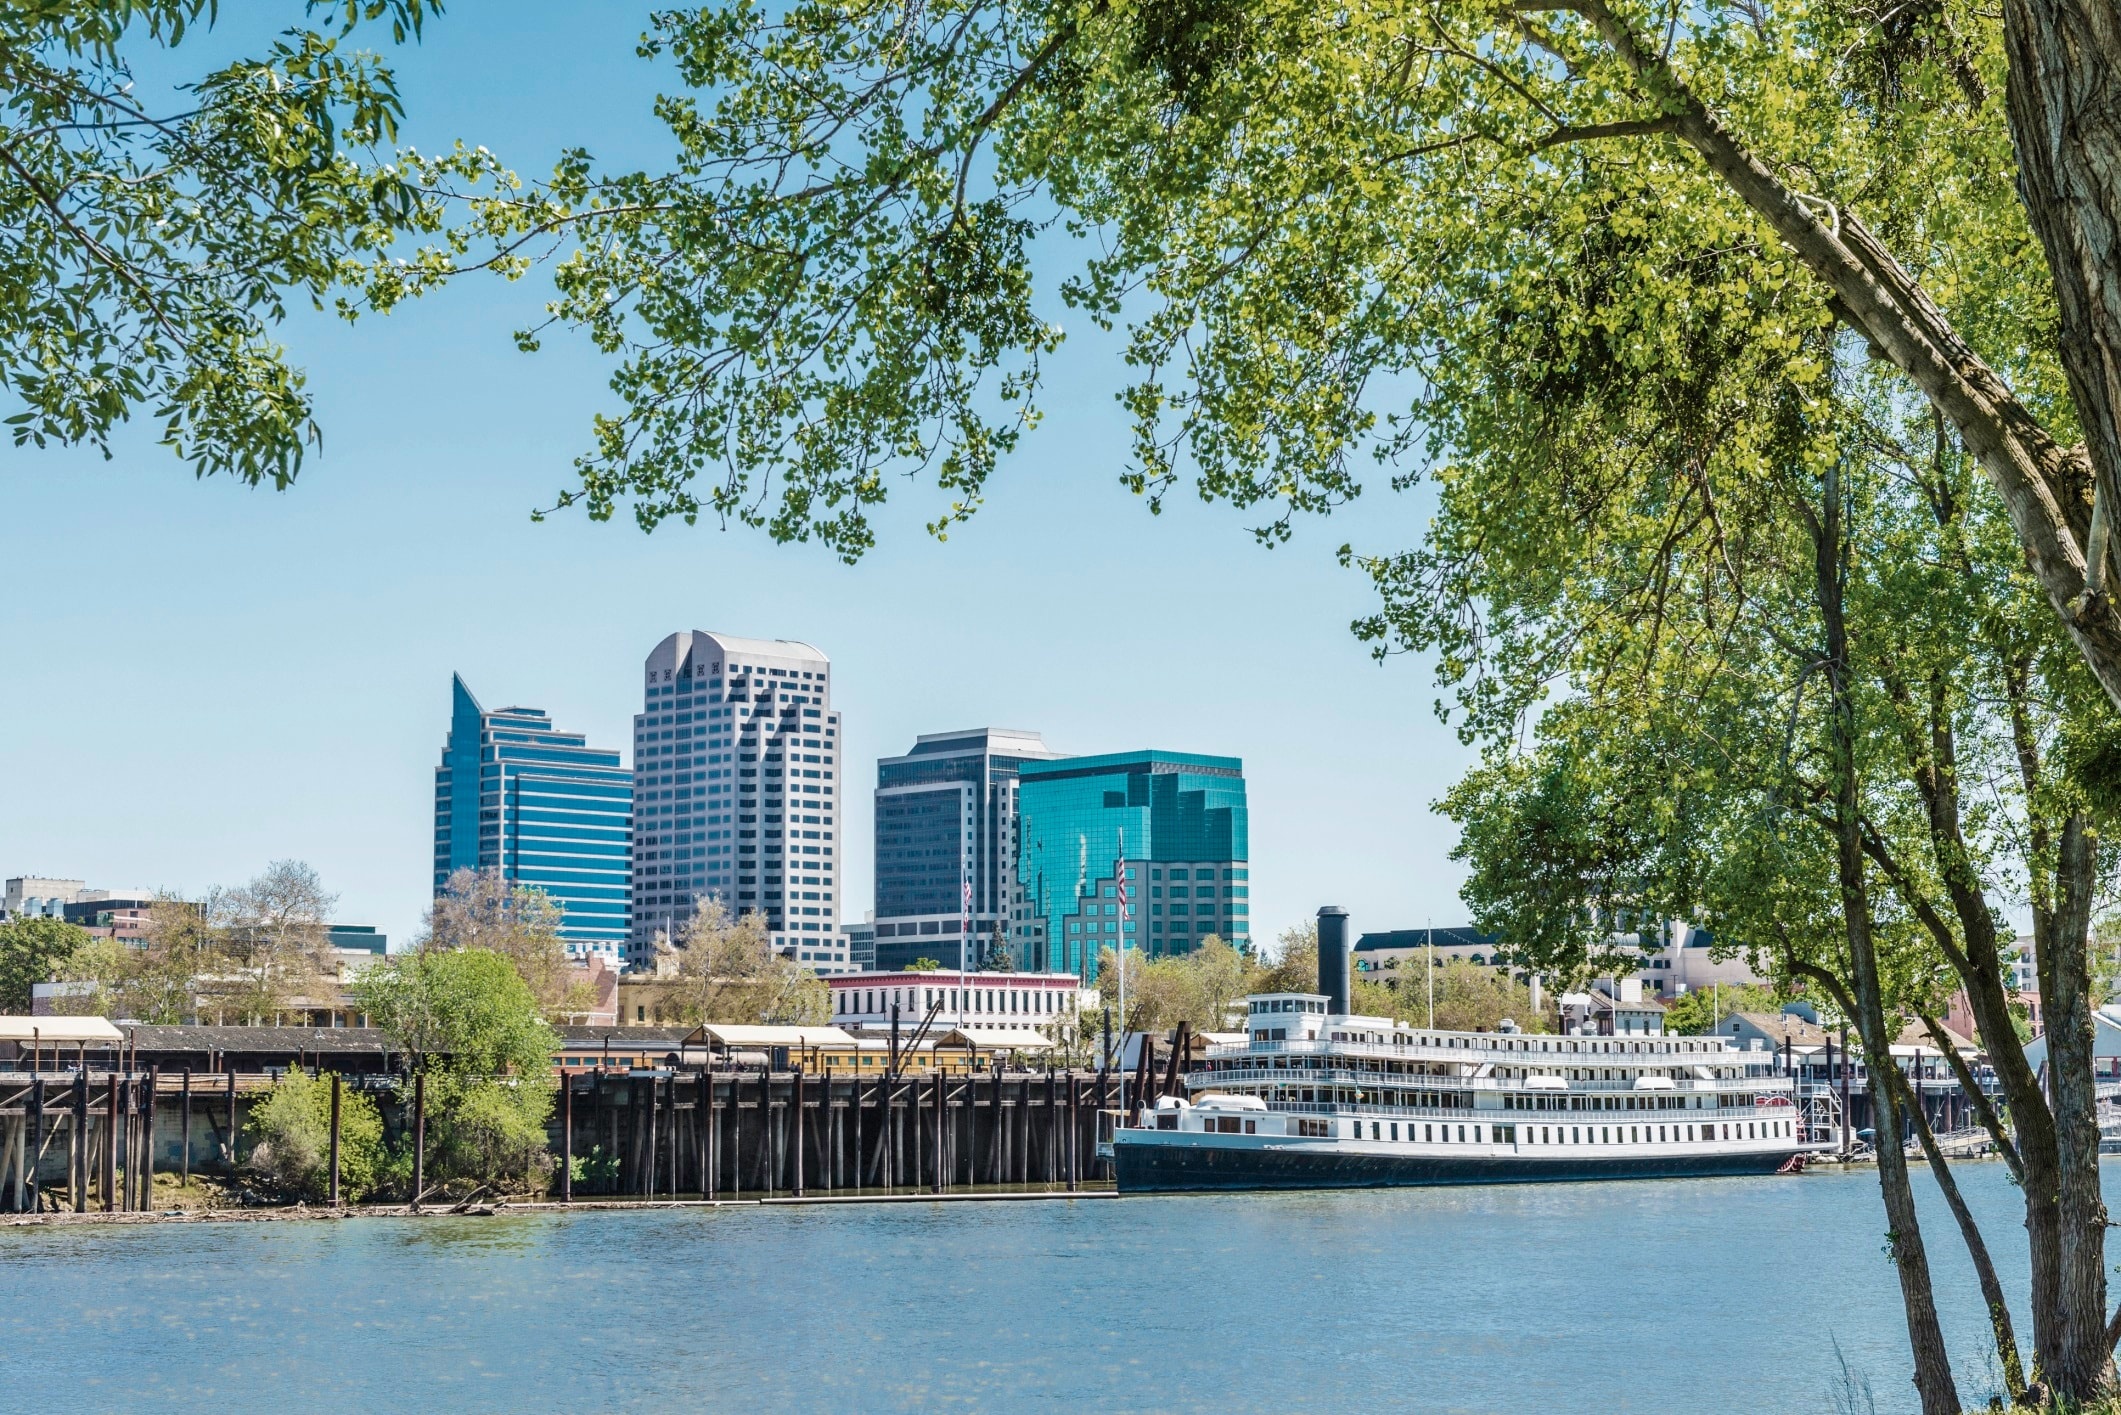 Top hotels in Sacramento, Marriott accommodations, Premier hospitality, Comfortable stay, 2130x1420 HD Desktop